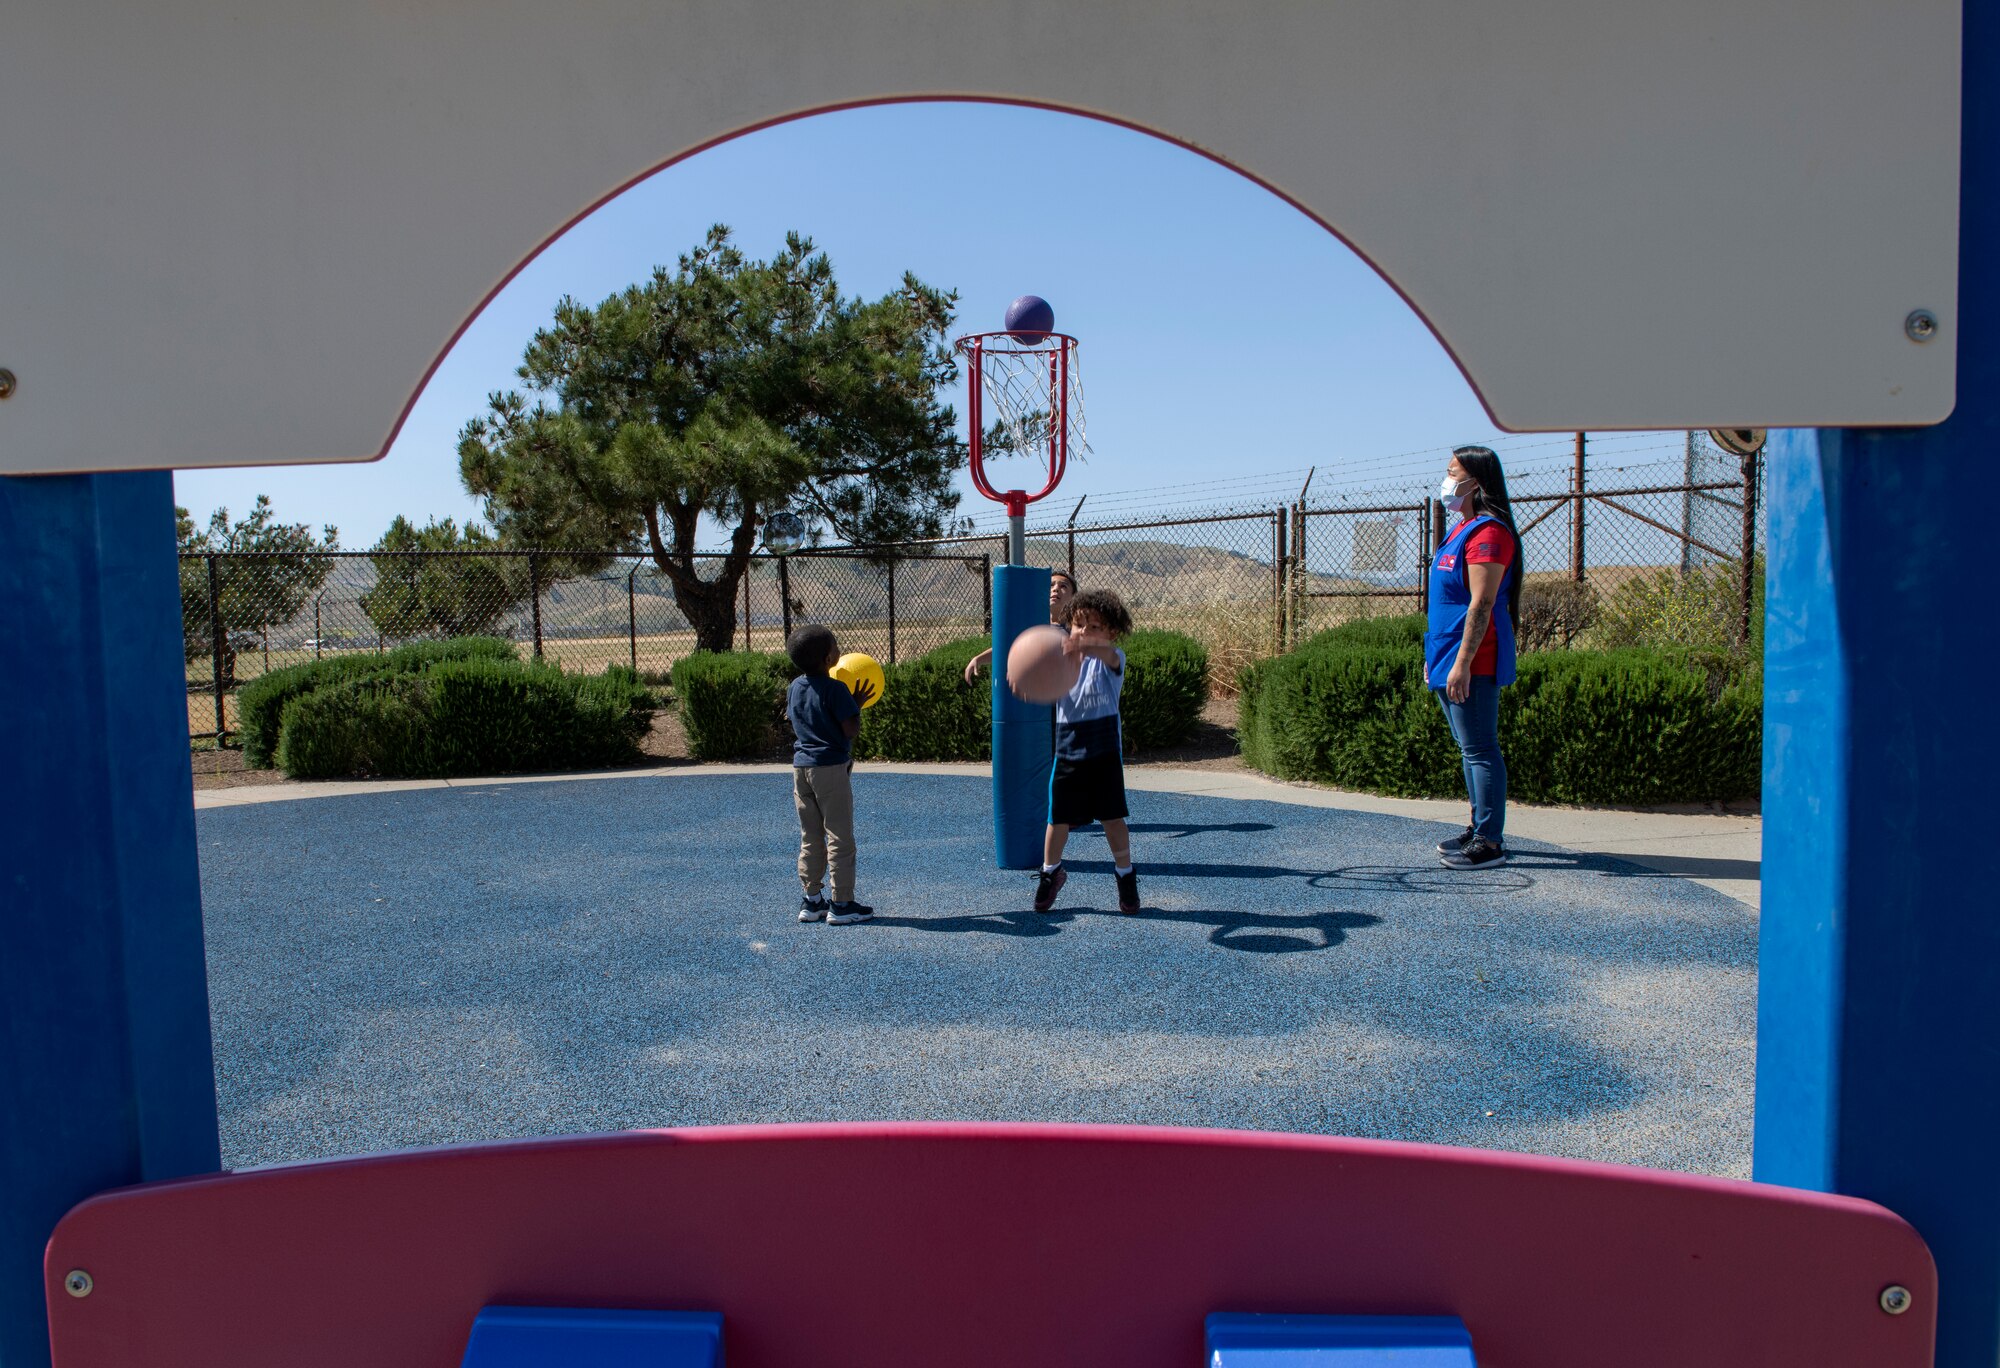 Cheryl Jose, right, 60th Force Support Squadron child and development program technician, supervises children May 1, 2020, as they play outside Child Development Center 3 at Travis Air Force Base, California. Travis AFB has three childcare centers that have cared for military children during the coronavirus pandemic. (U.S. Air Force photo by Tech. Sgt. James Hodgman)